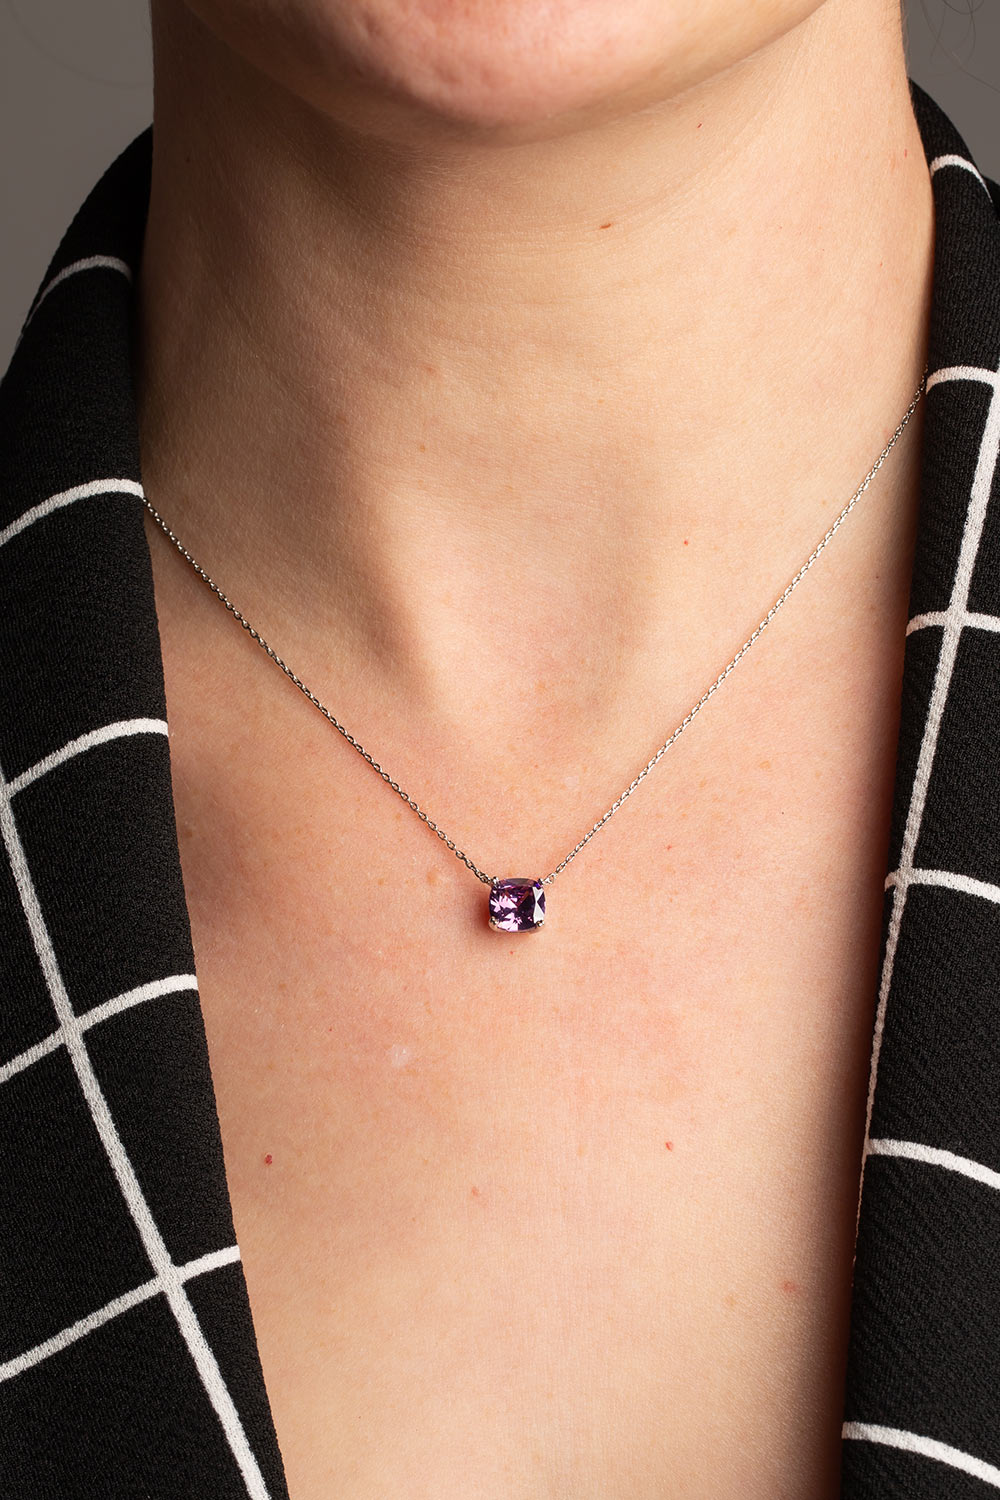 Type 4 Violet Ice Necklace